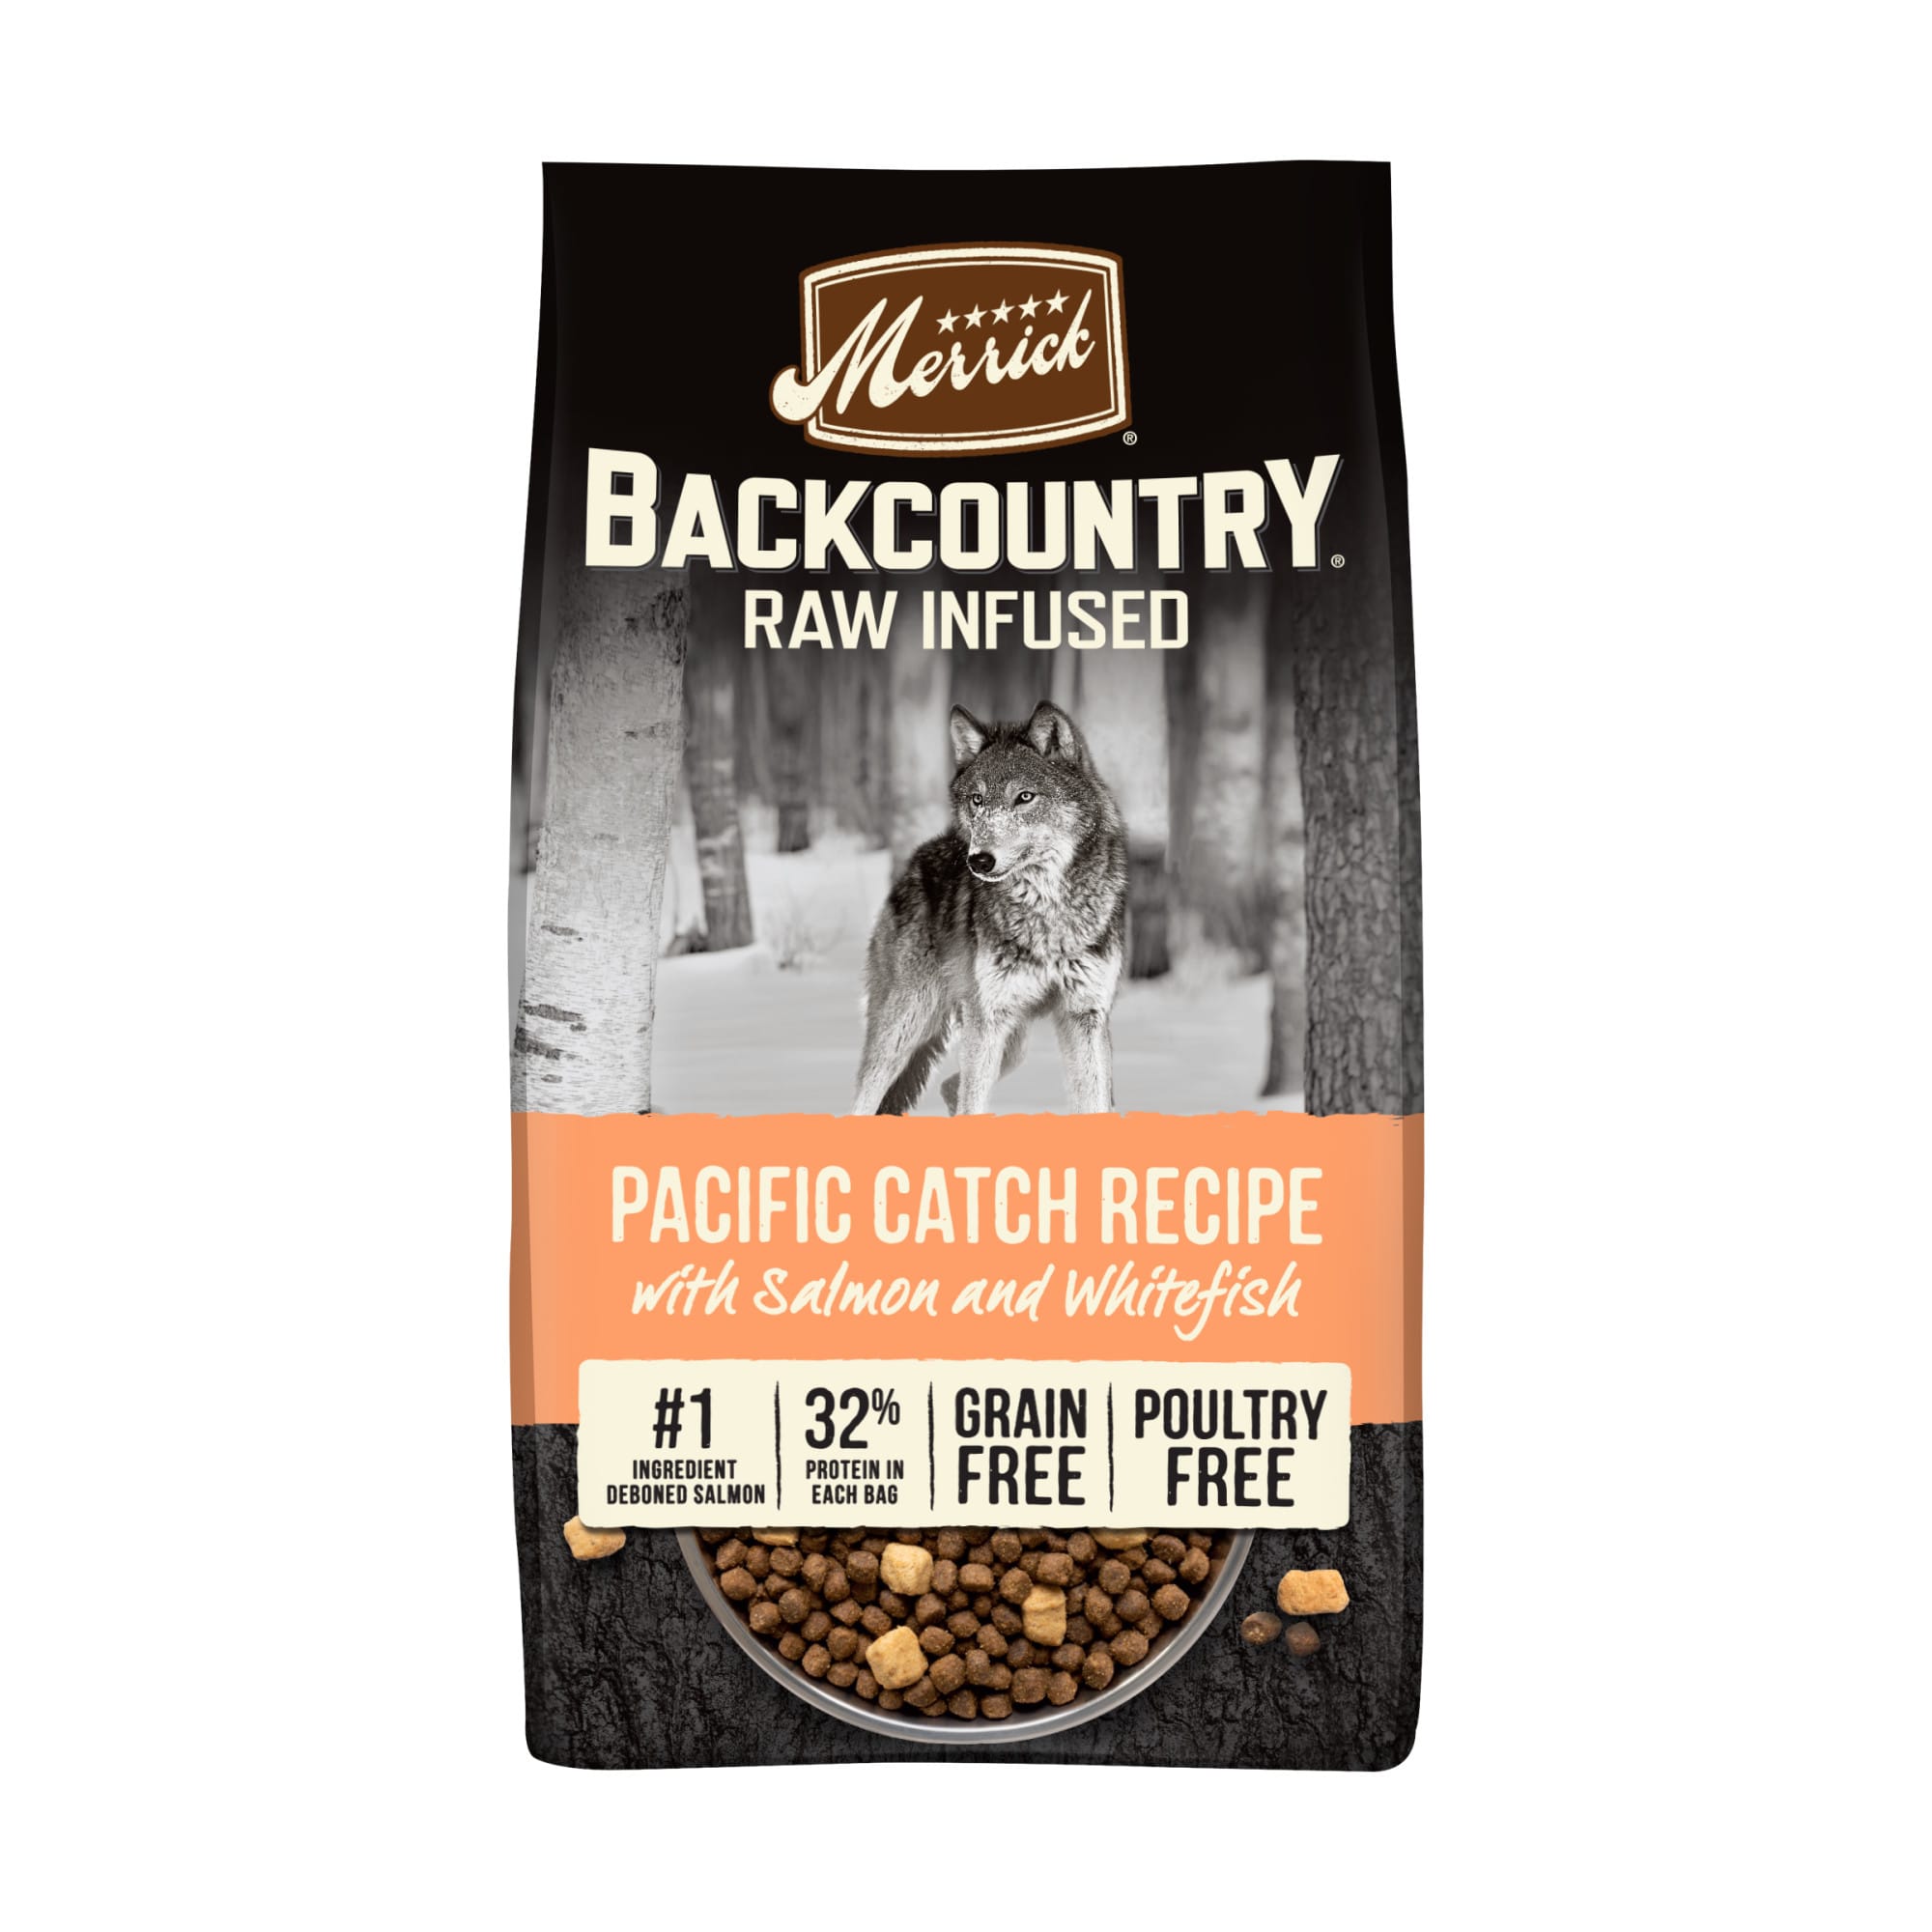 Merrick Backcountry Raw Infused Grain Free Pacific Catch Recipe